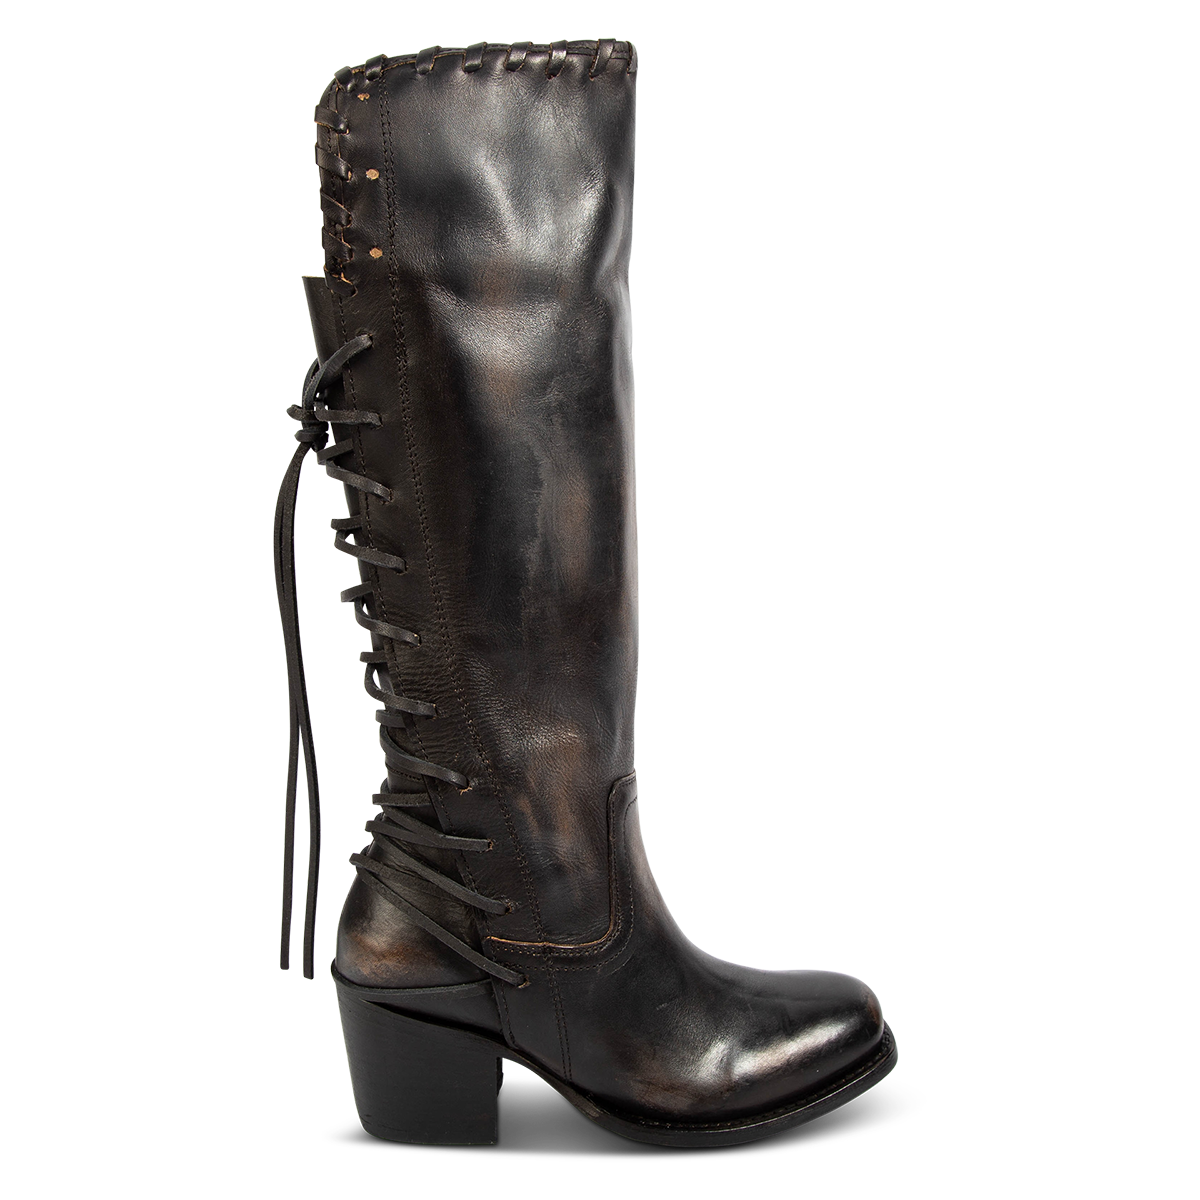 FREEBIRD women's Dillon black leather boot with 100% full grain leather, whip stitch edge detailing and adjustable back leather lacing